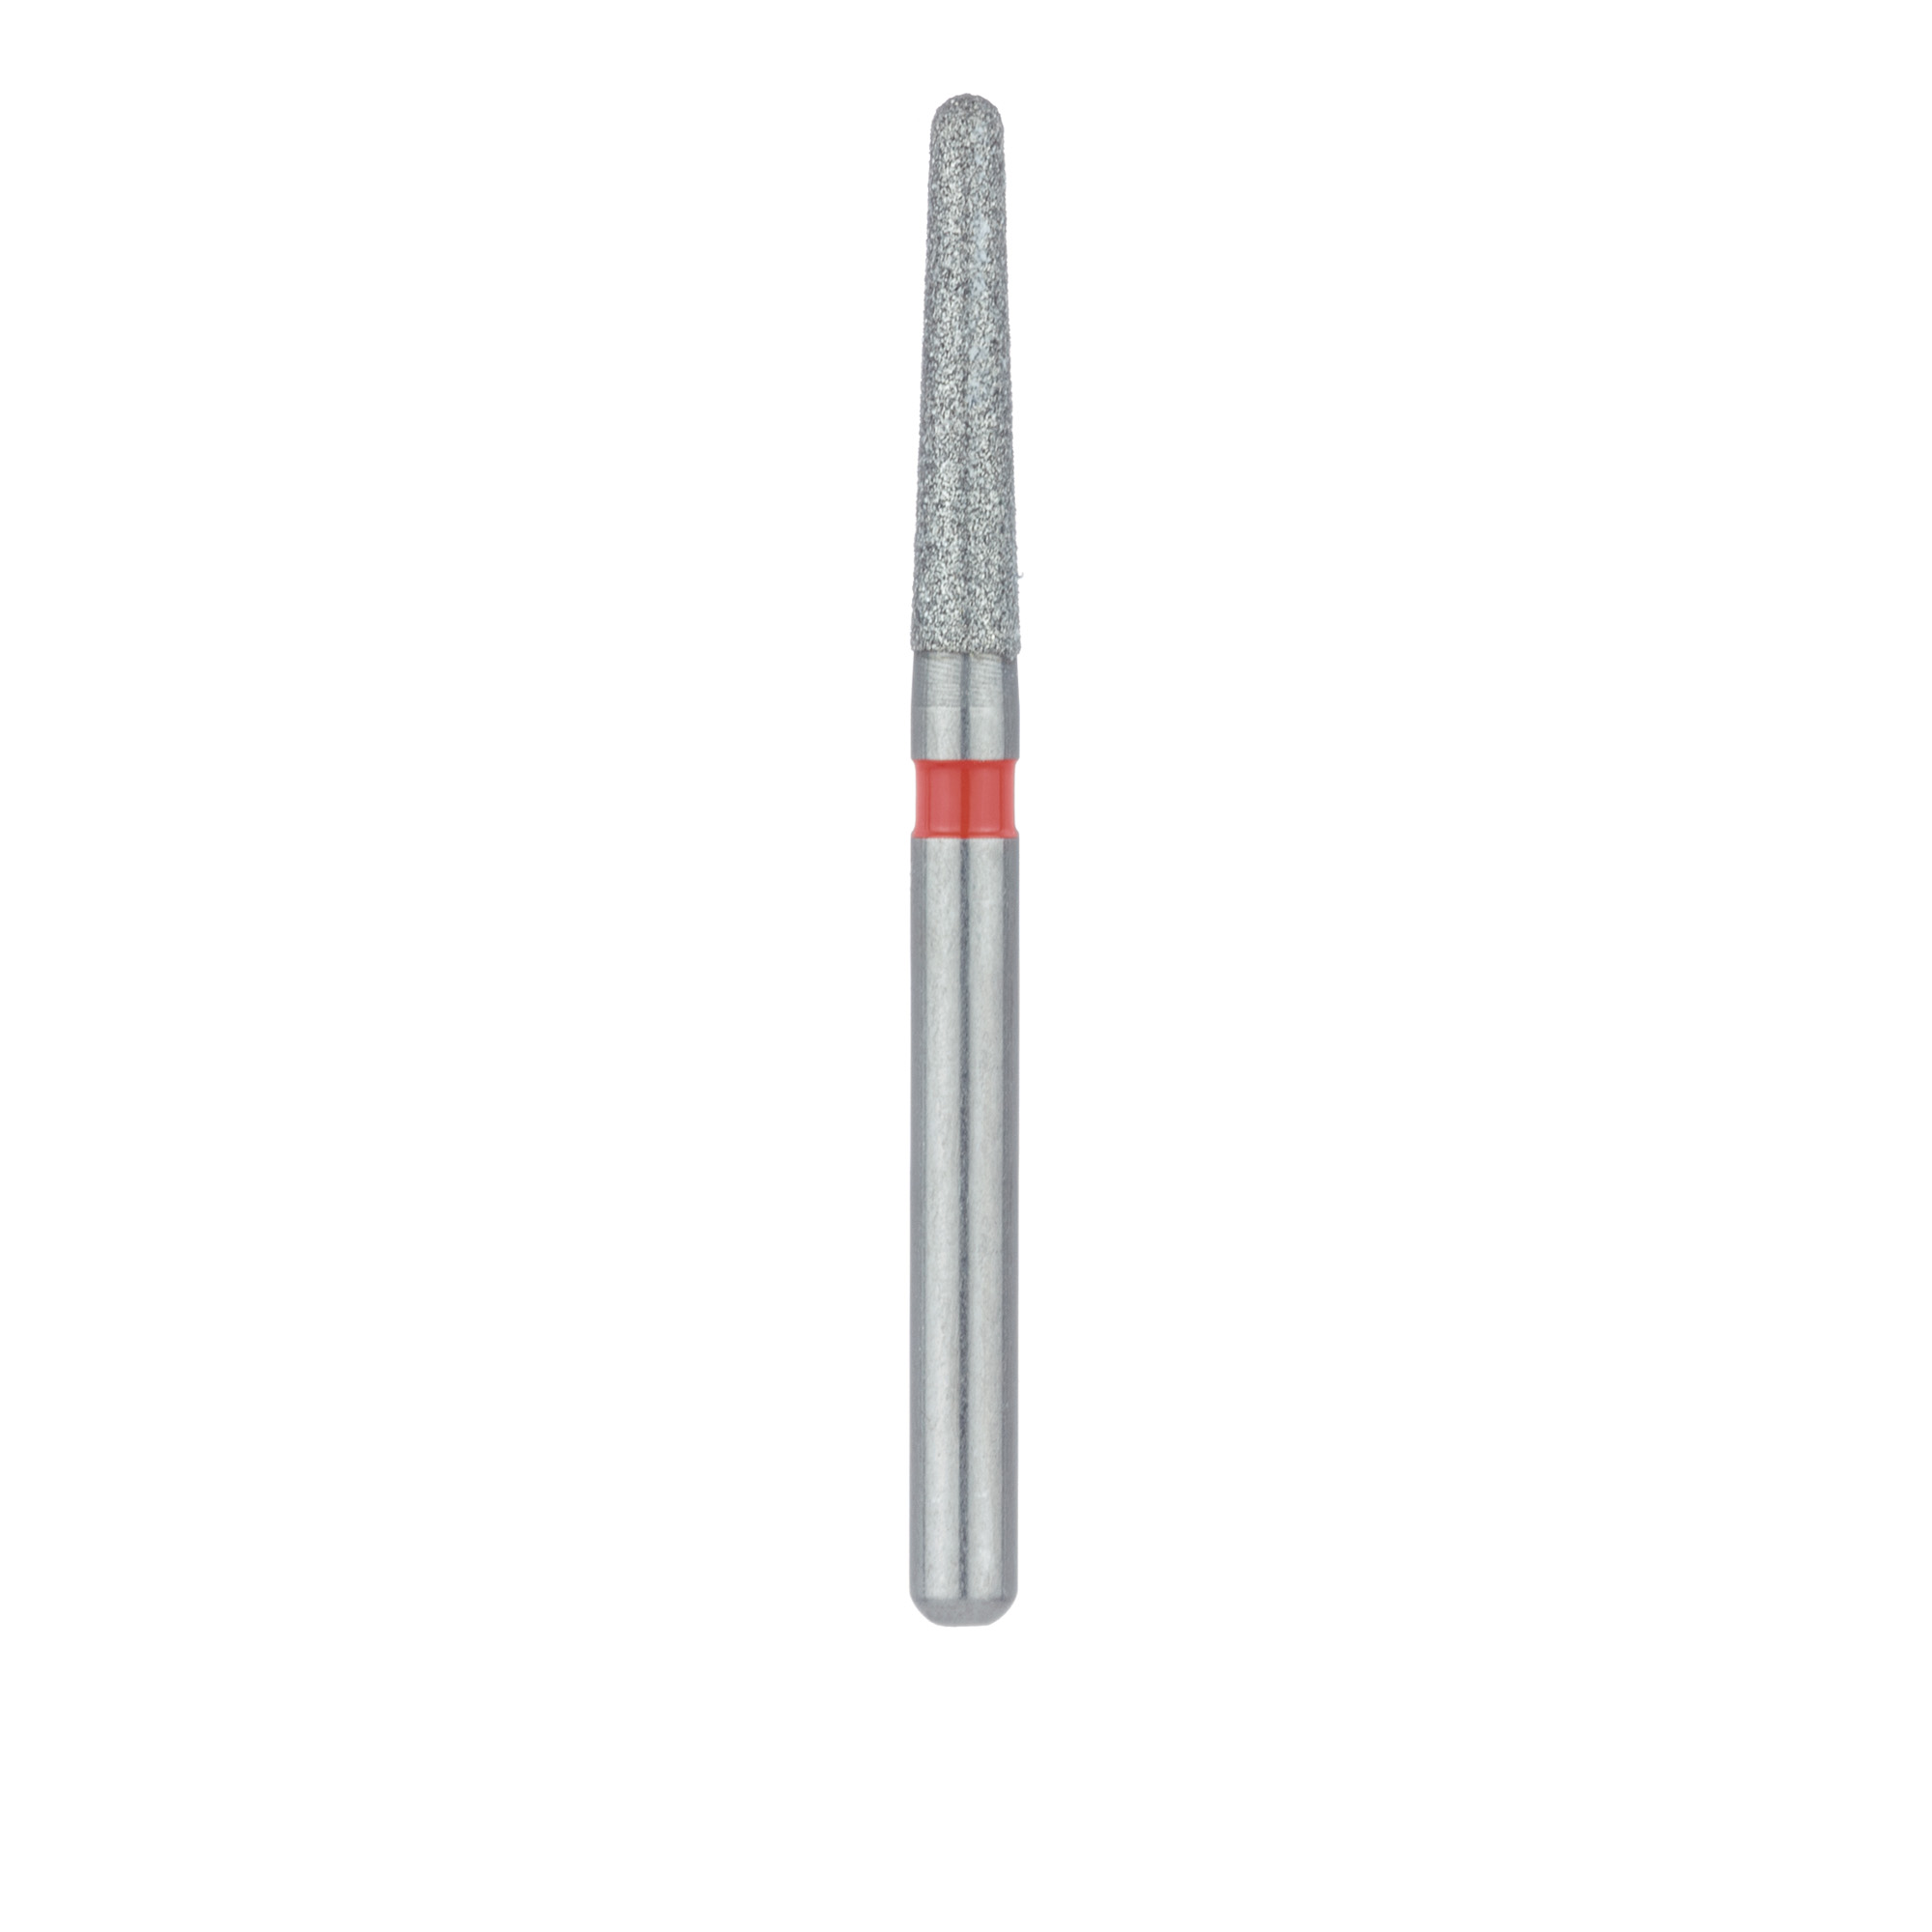 1116.8F Single-Use Diamond Bur, Sterile, 25 Pack, 1.6mm Ø, Tapered, Round End, 8mm Working Length, Fine, FG